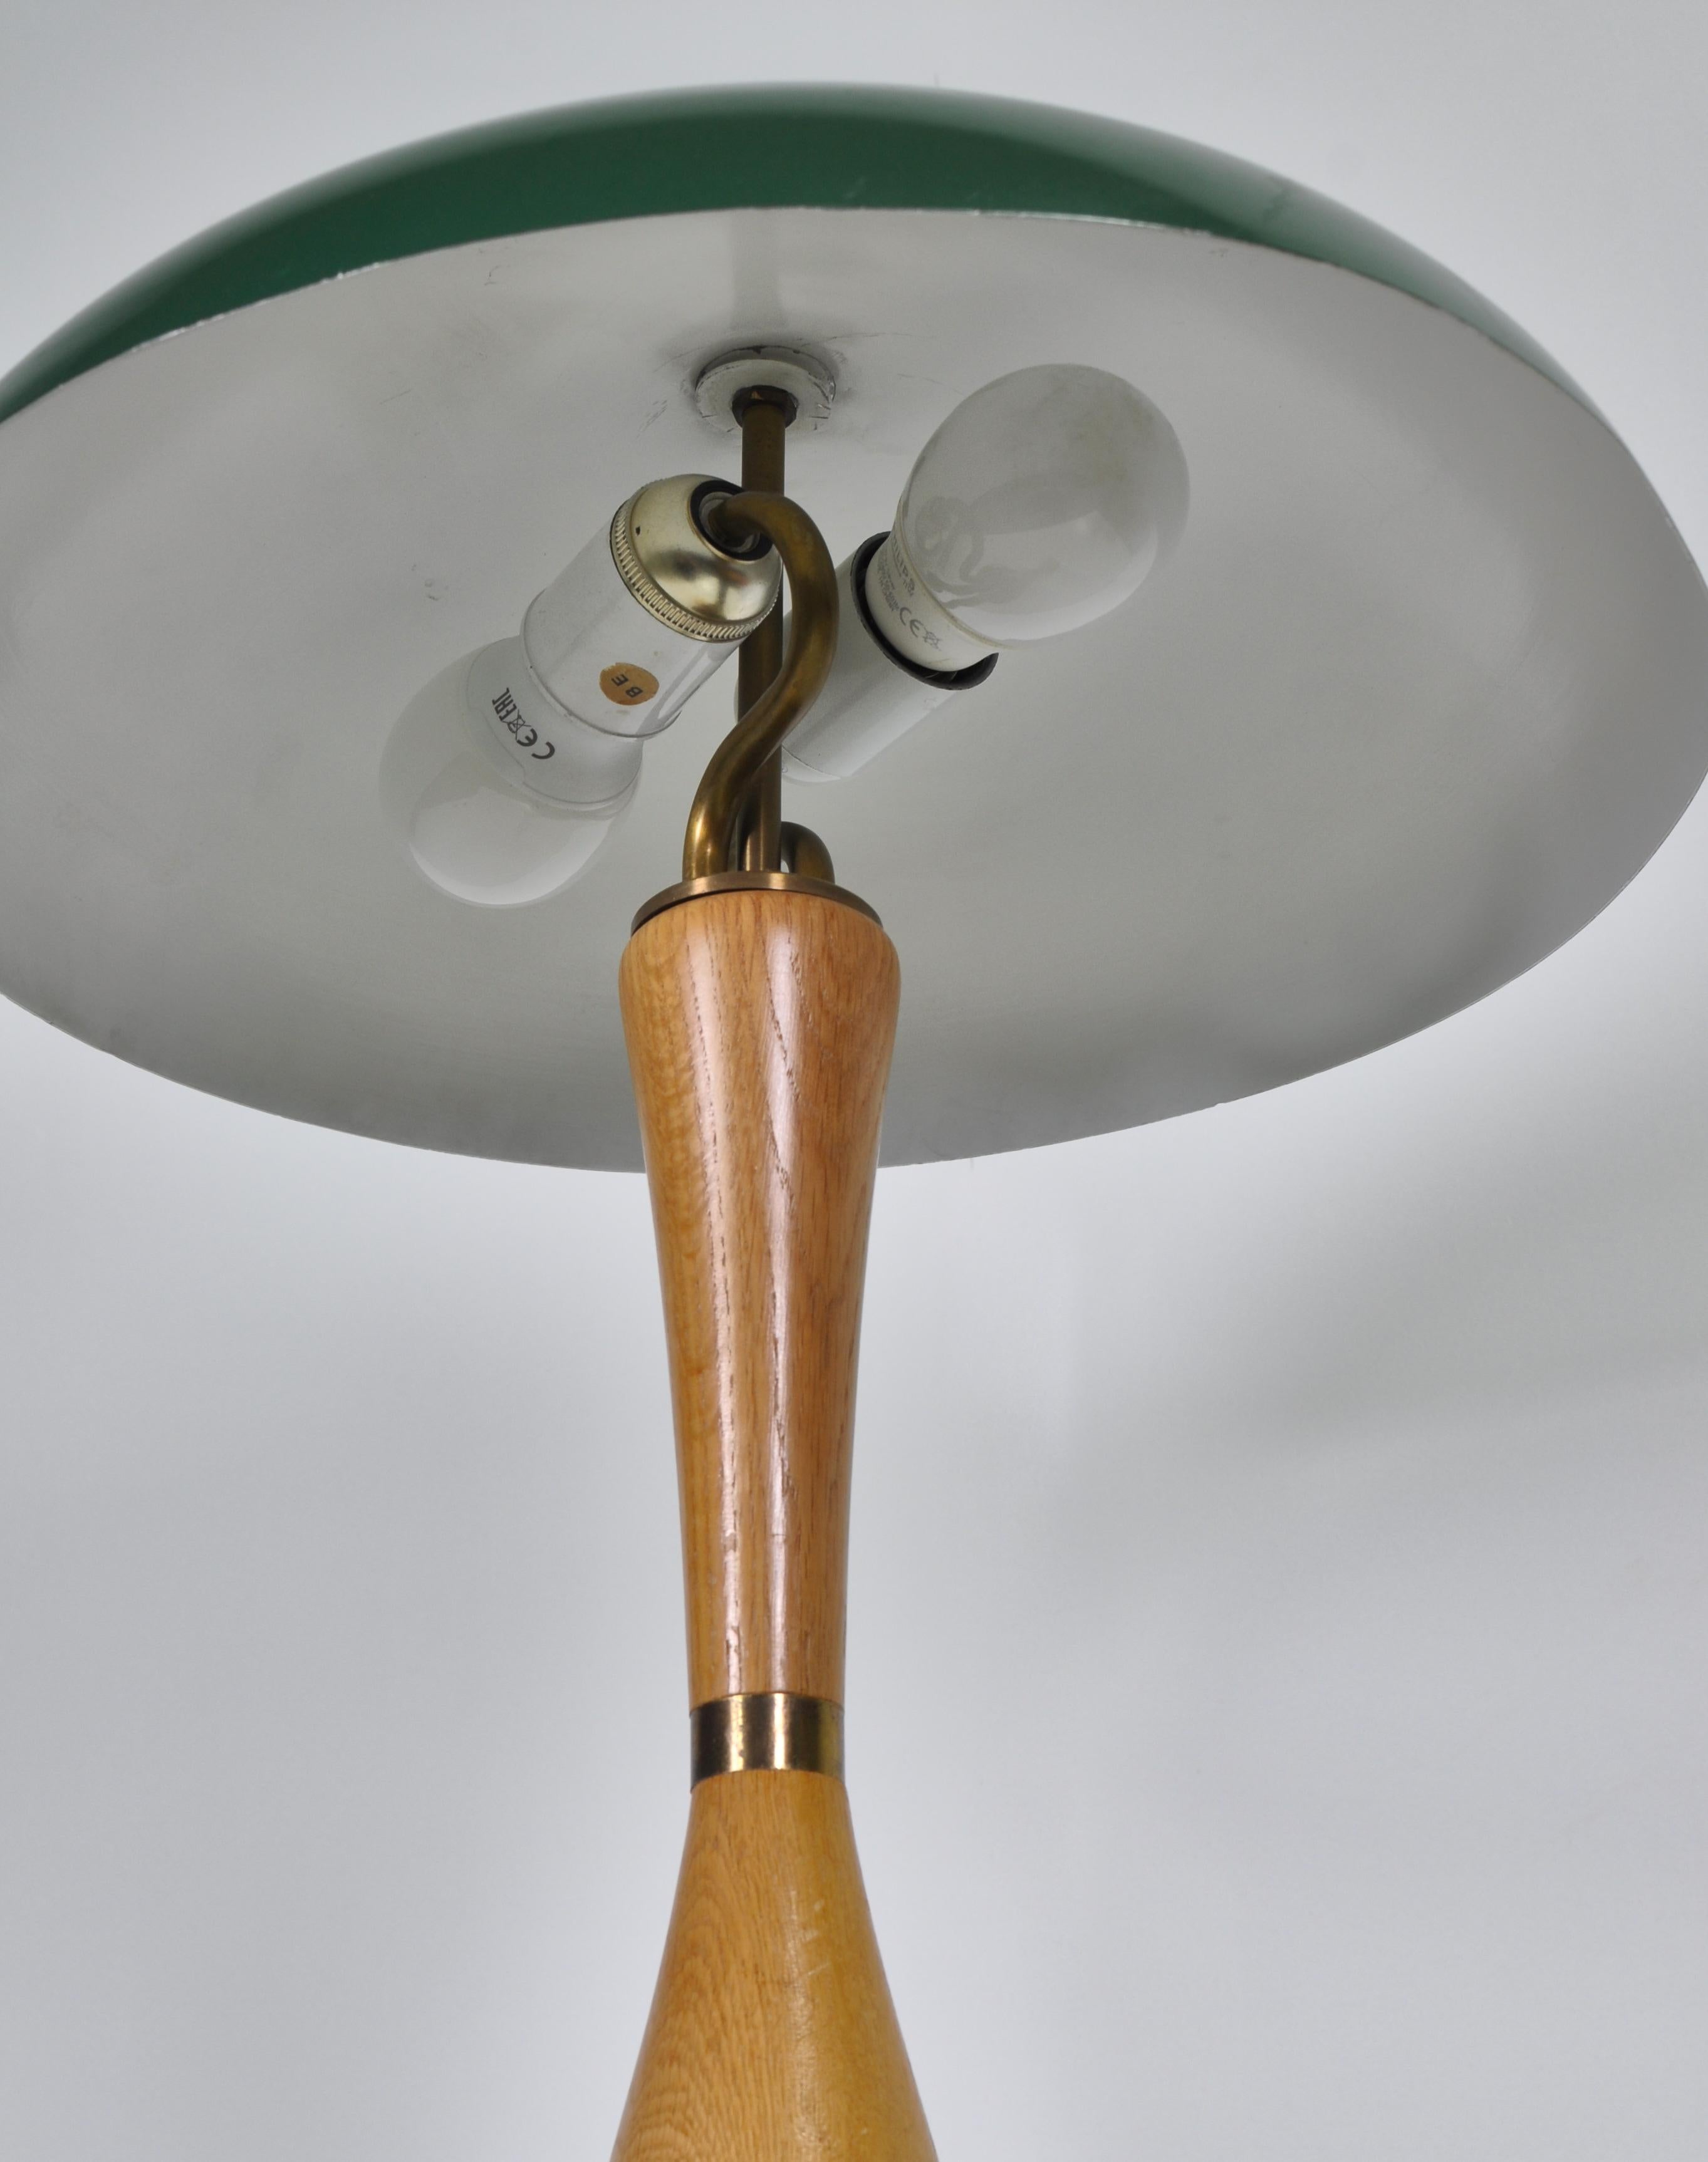 1950s Hans Bergström Table Lamp with Green Shade Made by ASEA, Sweden 2